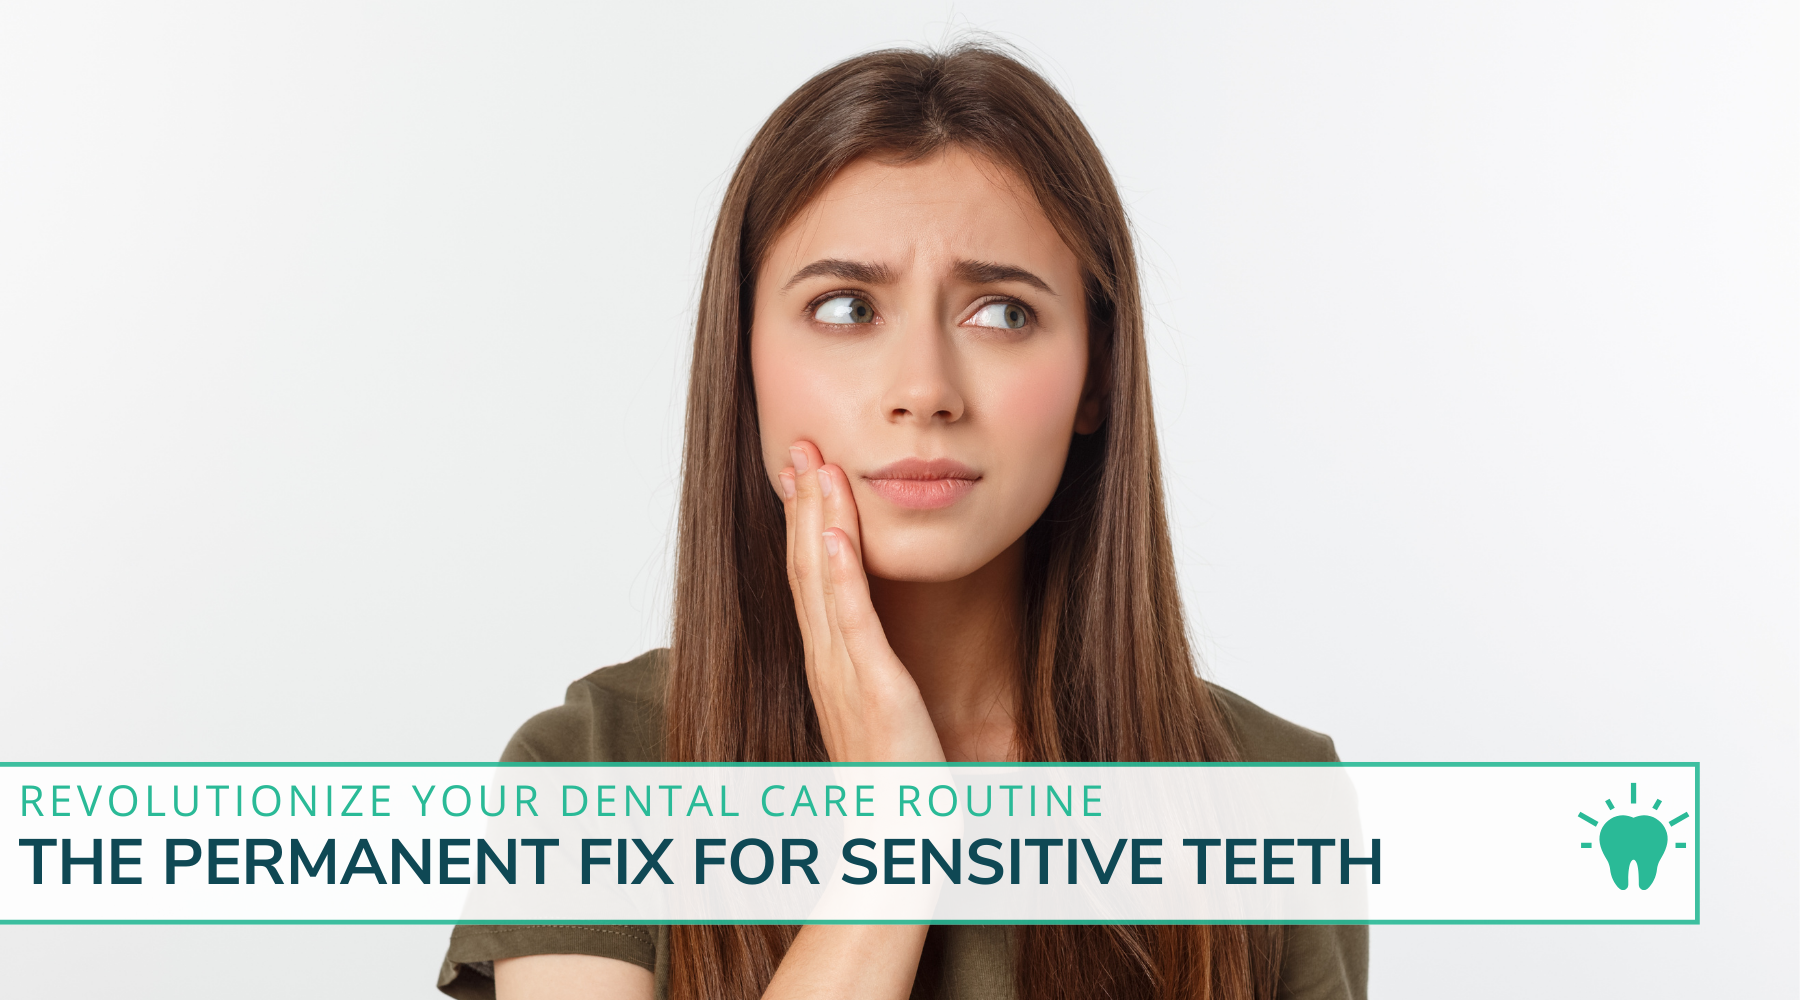 The Permanent Fix for Sensitive Teeth: Revolutionize Your Dental Care Routine